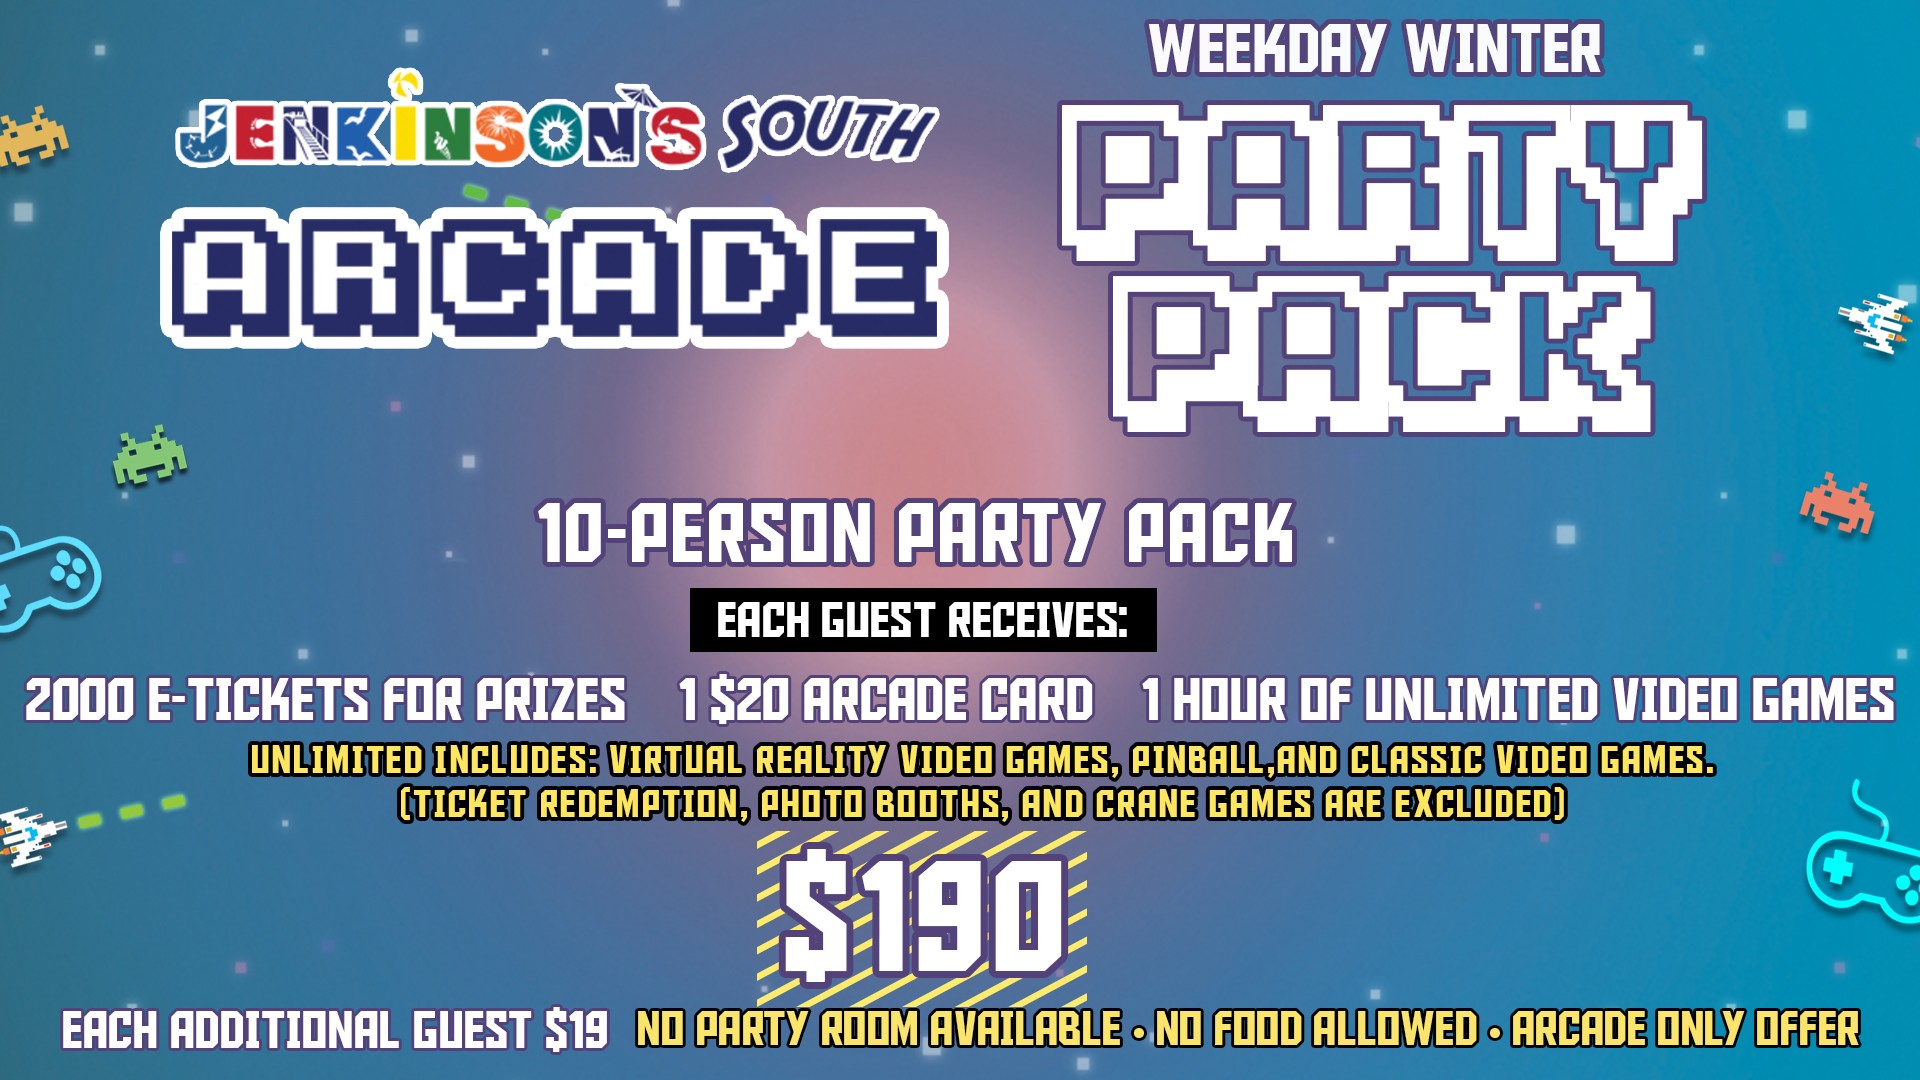 Party Pack for Jenkinson's South Arcade 